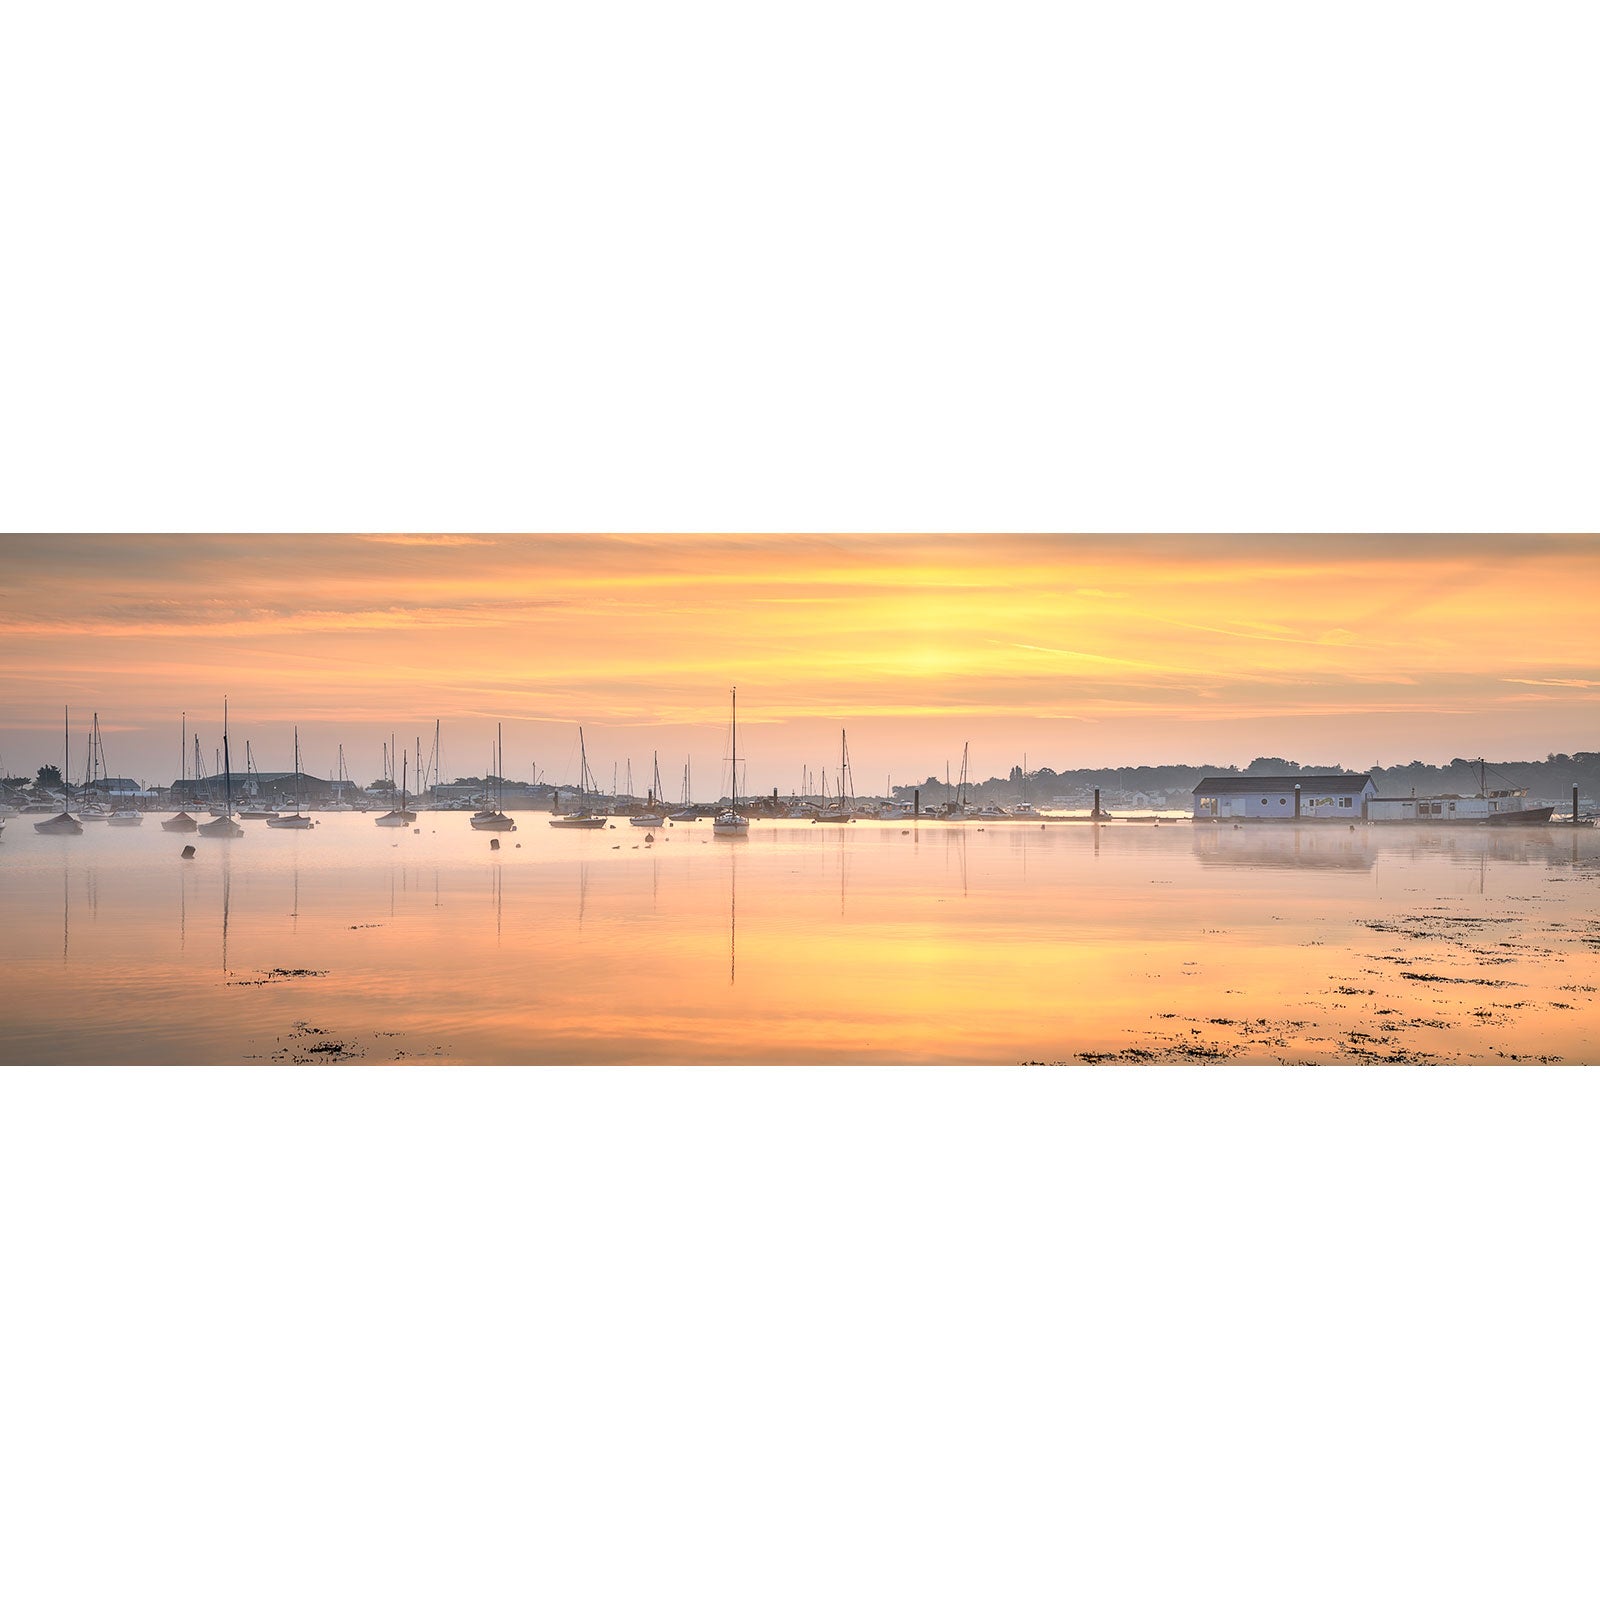 Sunrise over Bembridge Harbour with boats and reflections on the water on the Isle of Wight by Available Light Photography.